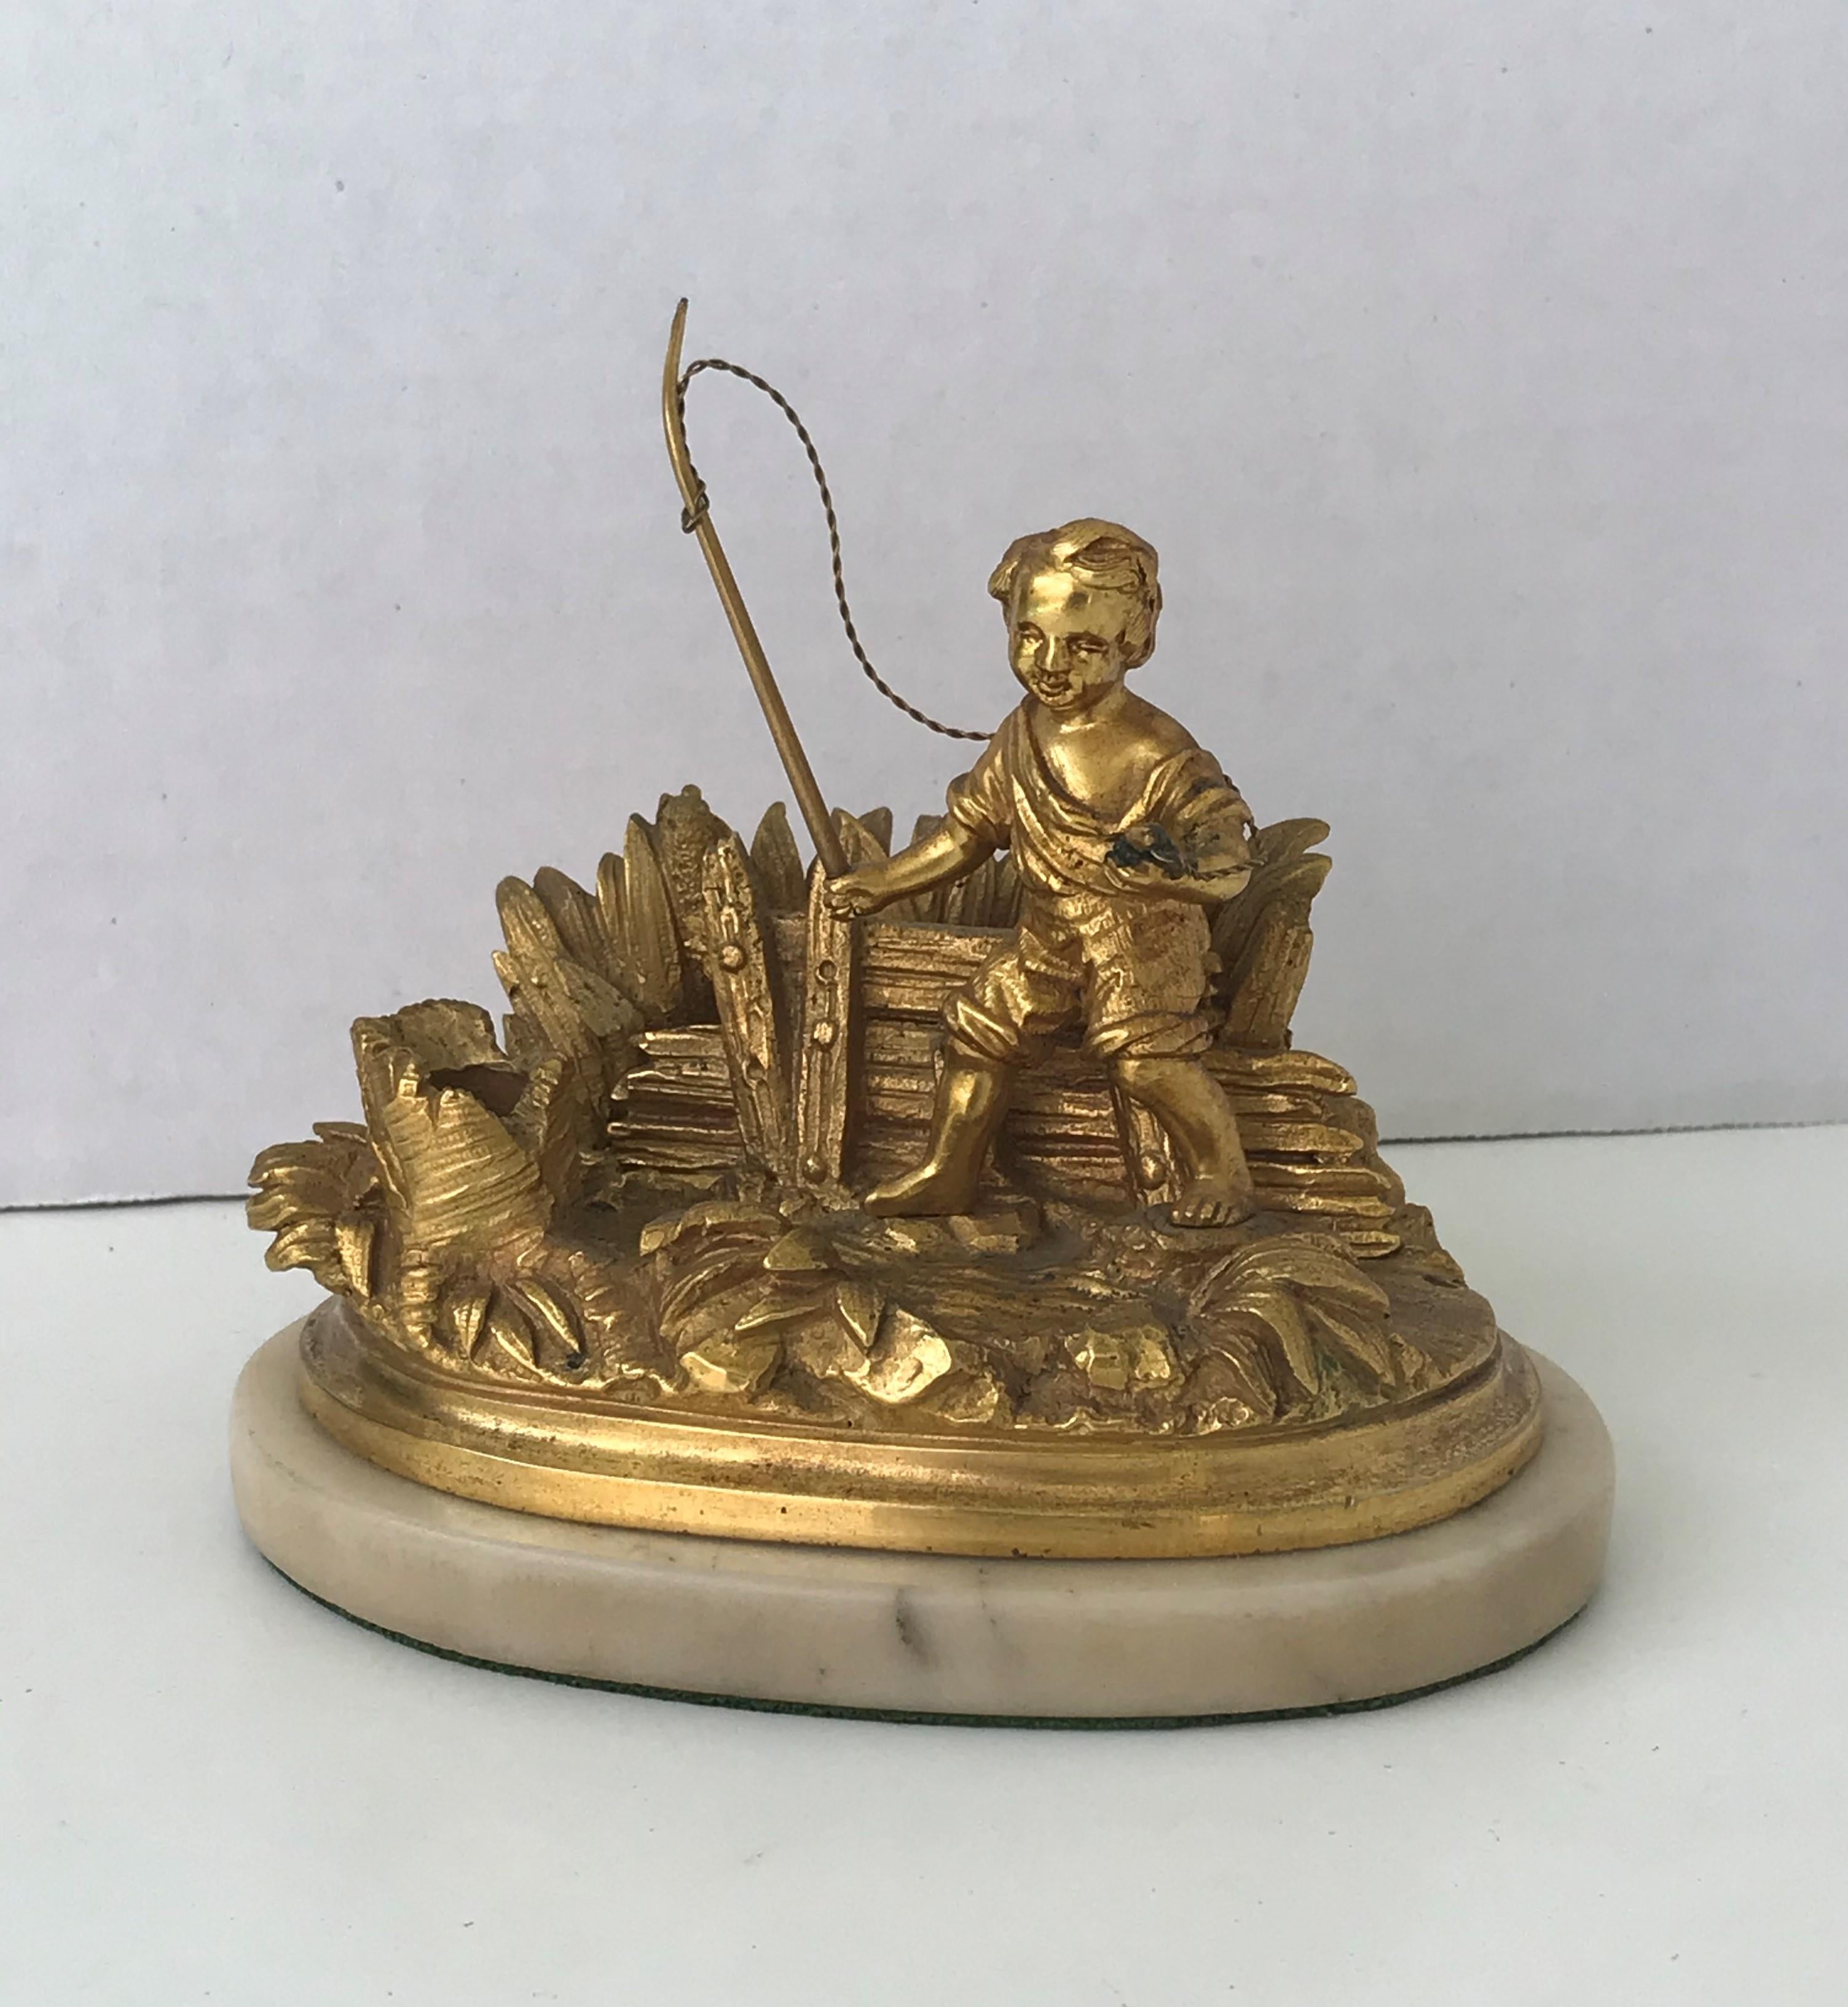 REDUCED FROM $450....This is a 19th century French bronze ink stand and pen holder/rest. Finely detailed figurative french bronze D'Ore desktop writing organizer featuring a fishing boy in a natural setting exhibiting marsh and riverside plants.